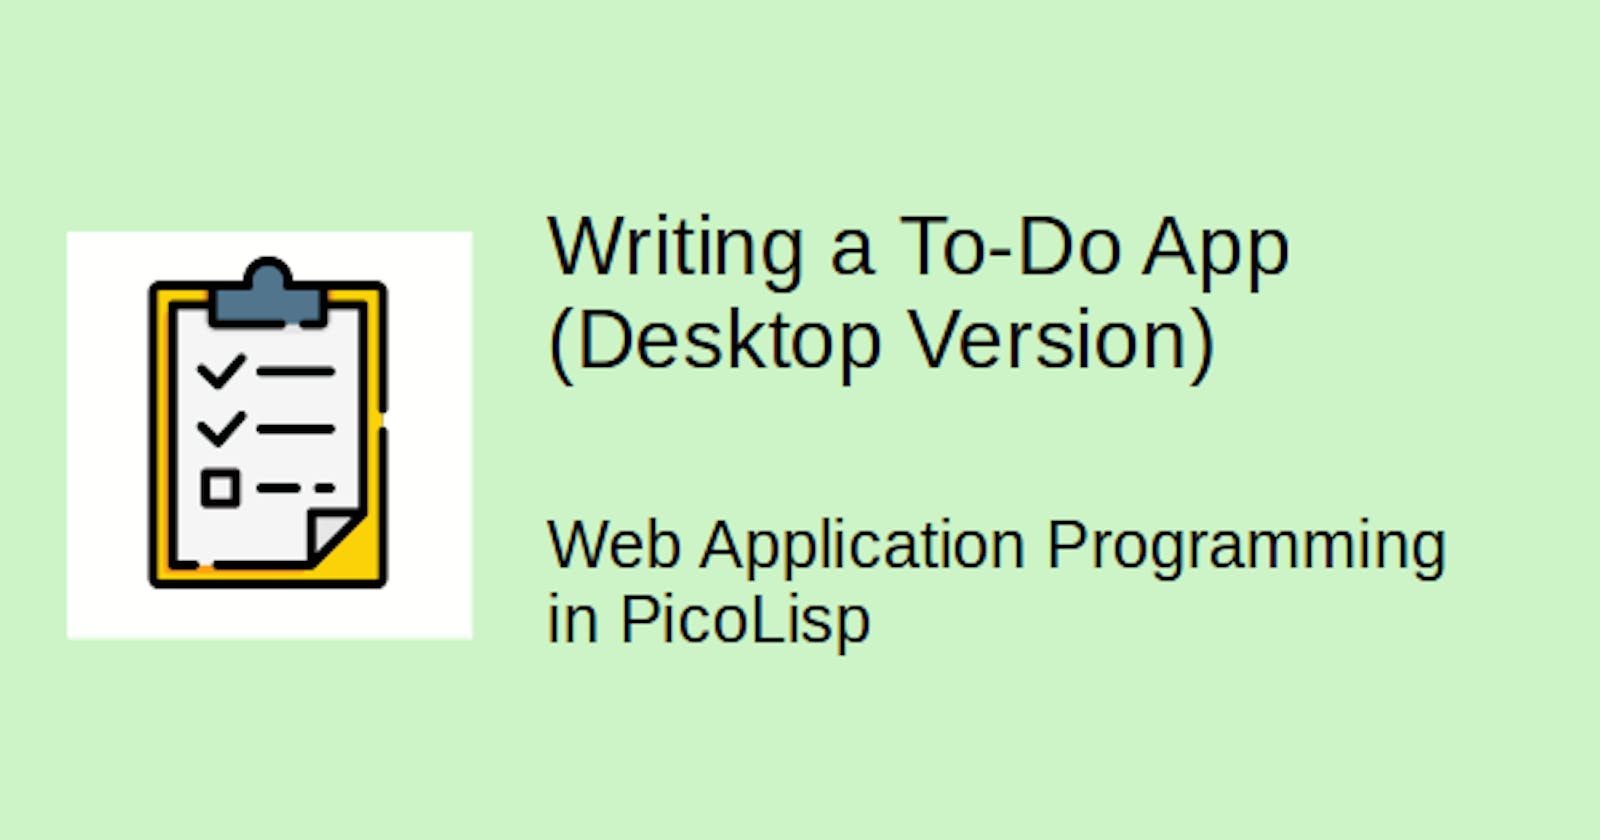 How to create a To-Do App in PicoLisp (Desktop Version)